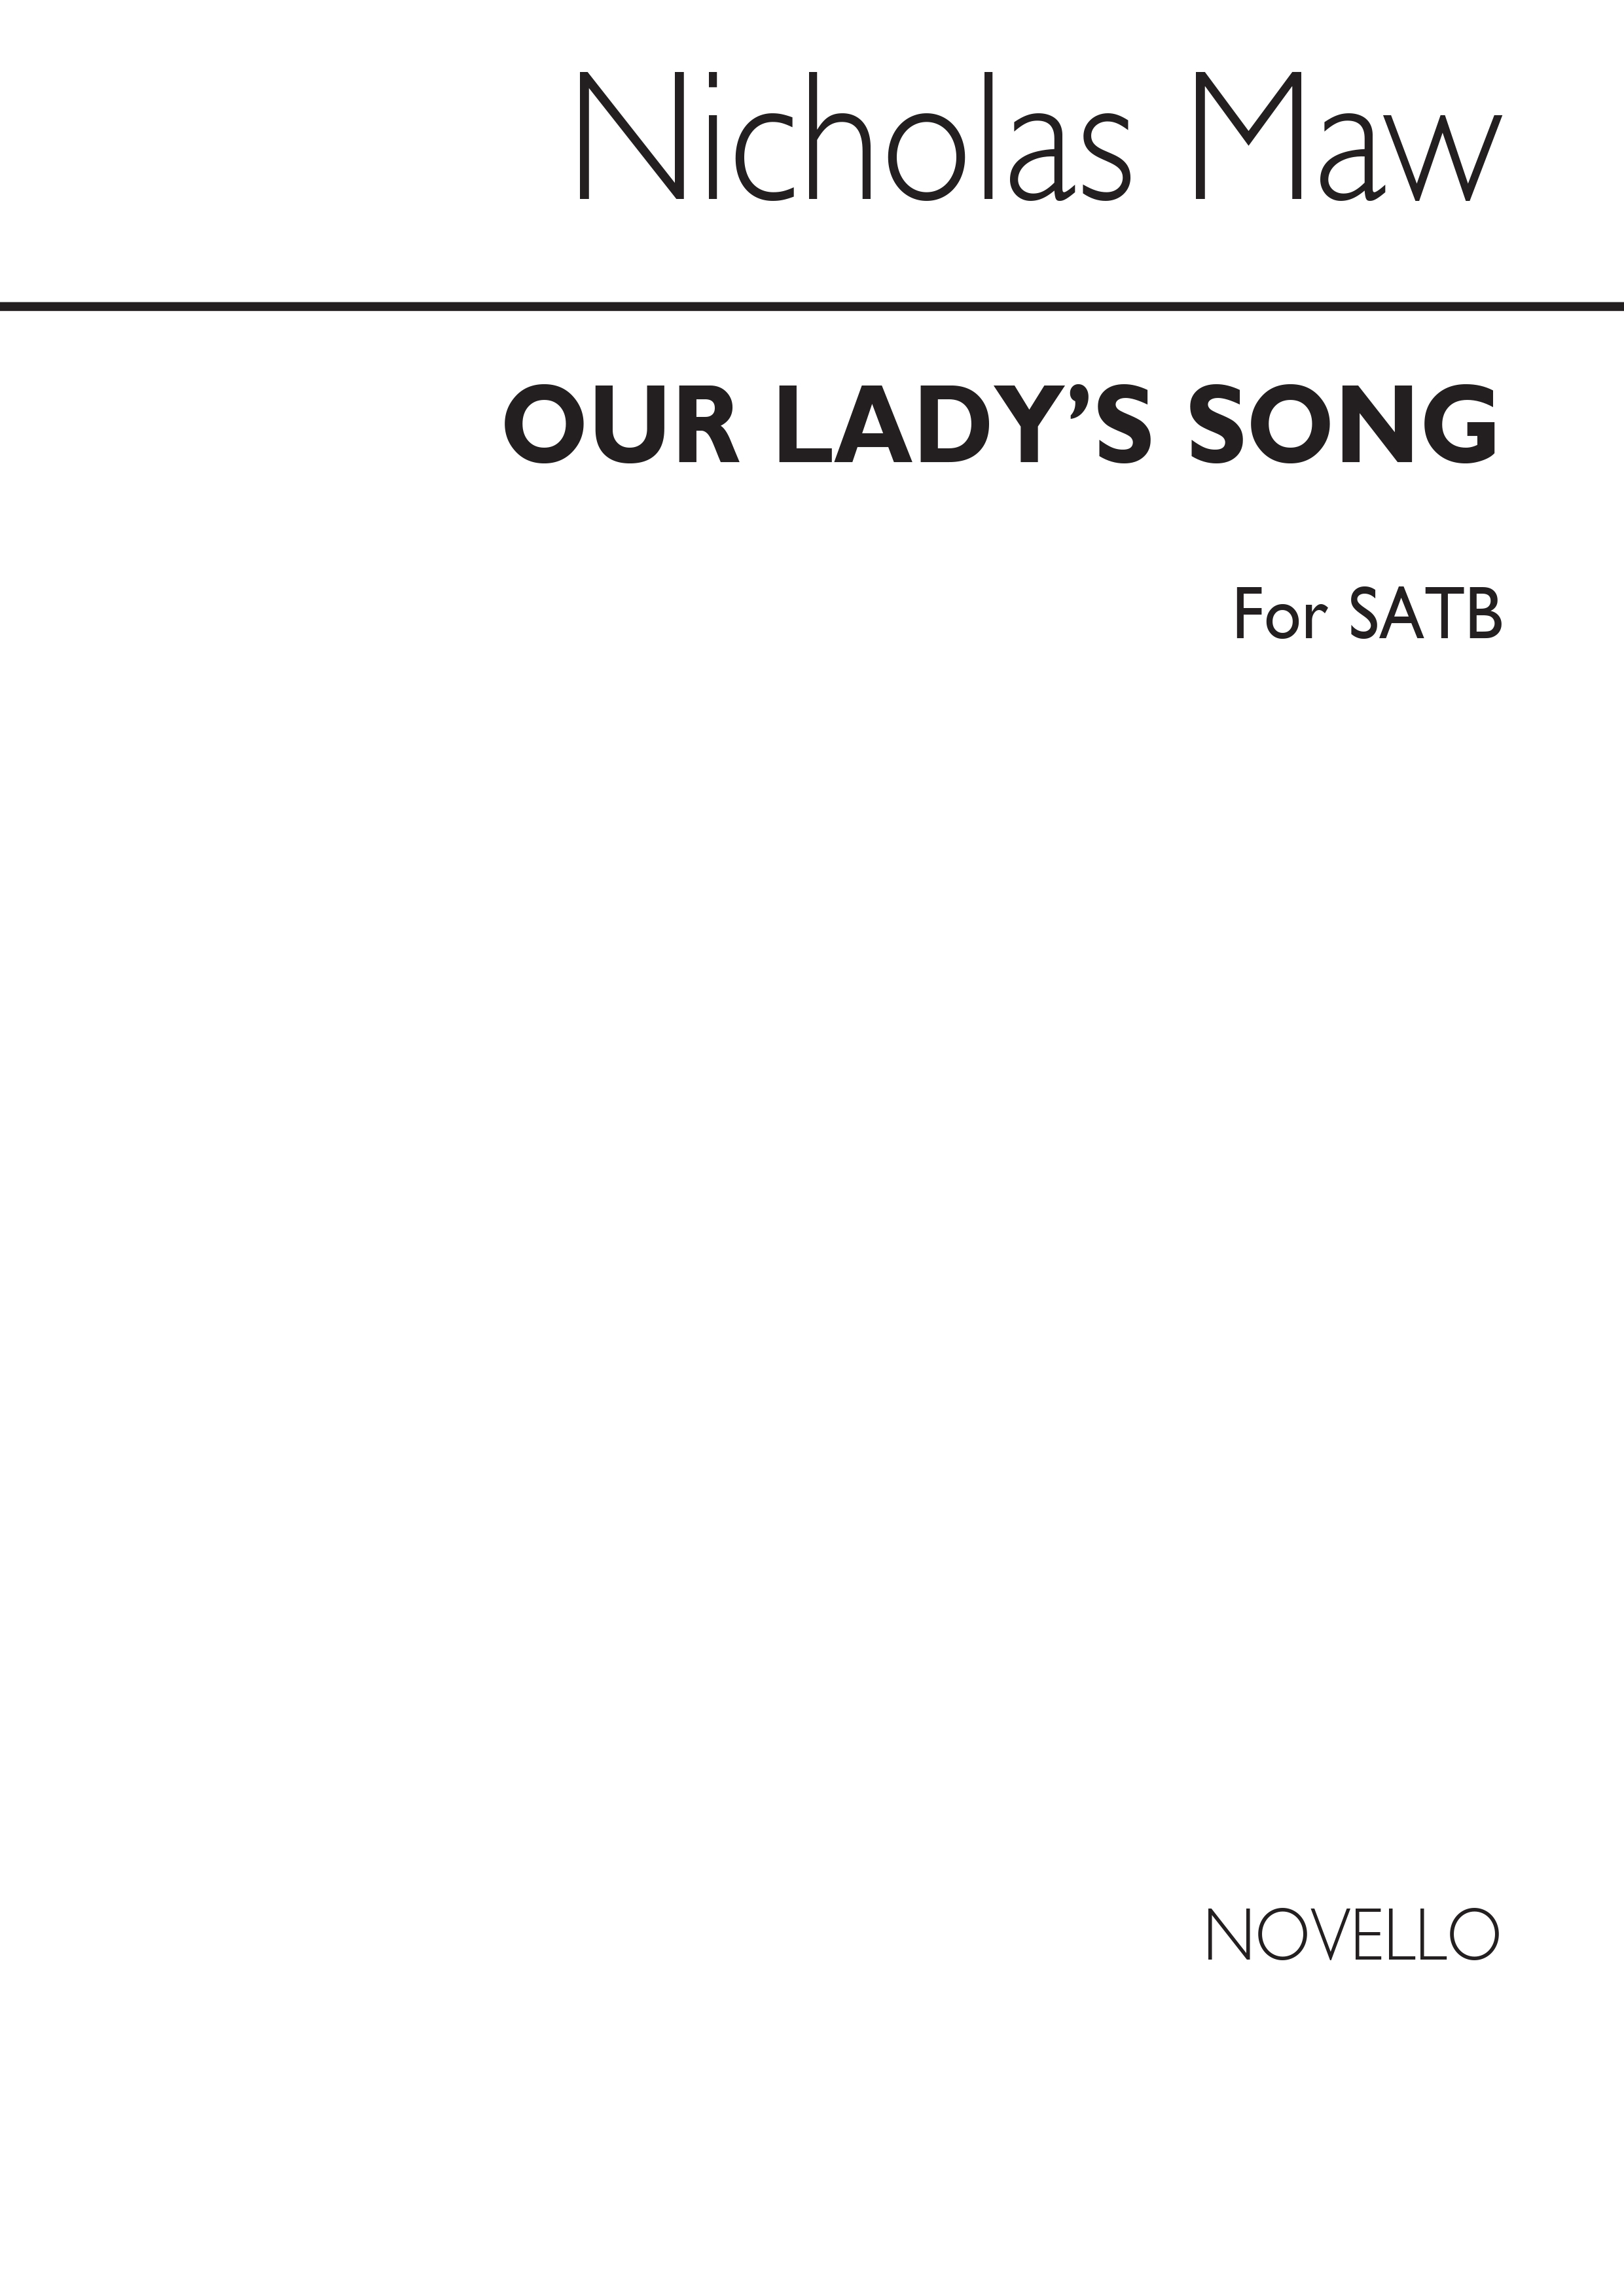 Nicholas Maw: Our Lady's Song